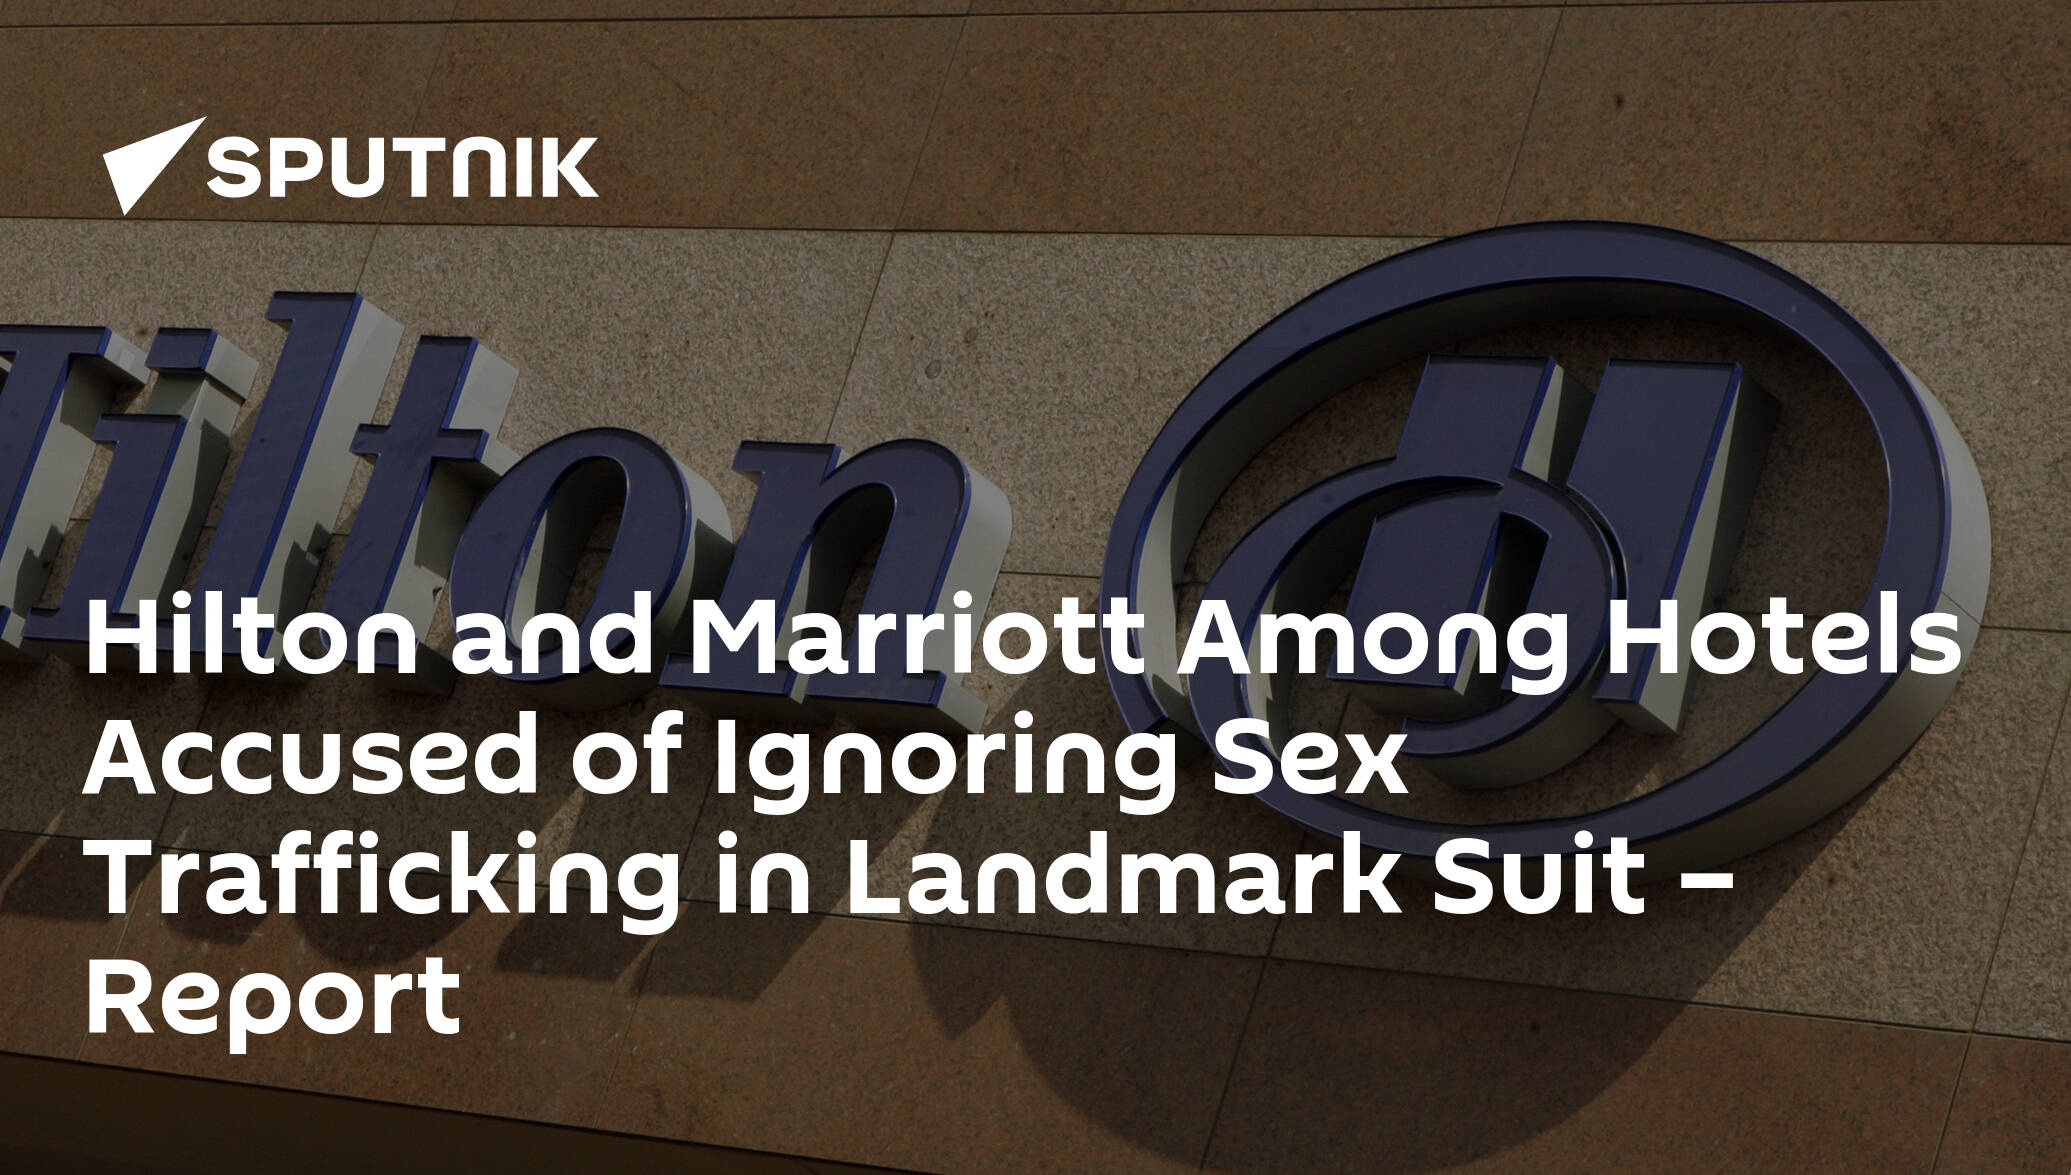 Hilton And Marriott Among Hotels Accused Of Ignoring Sex Trafficking In